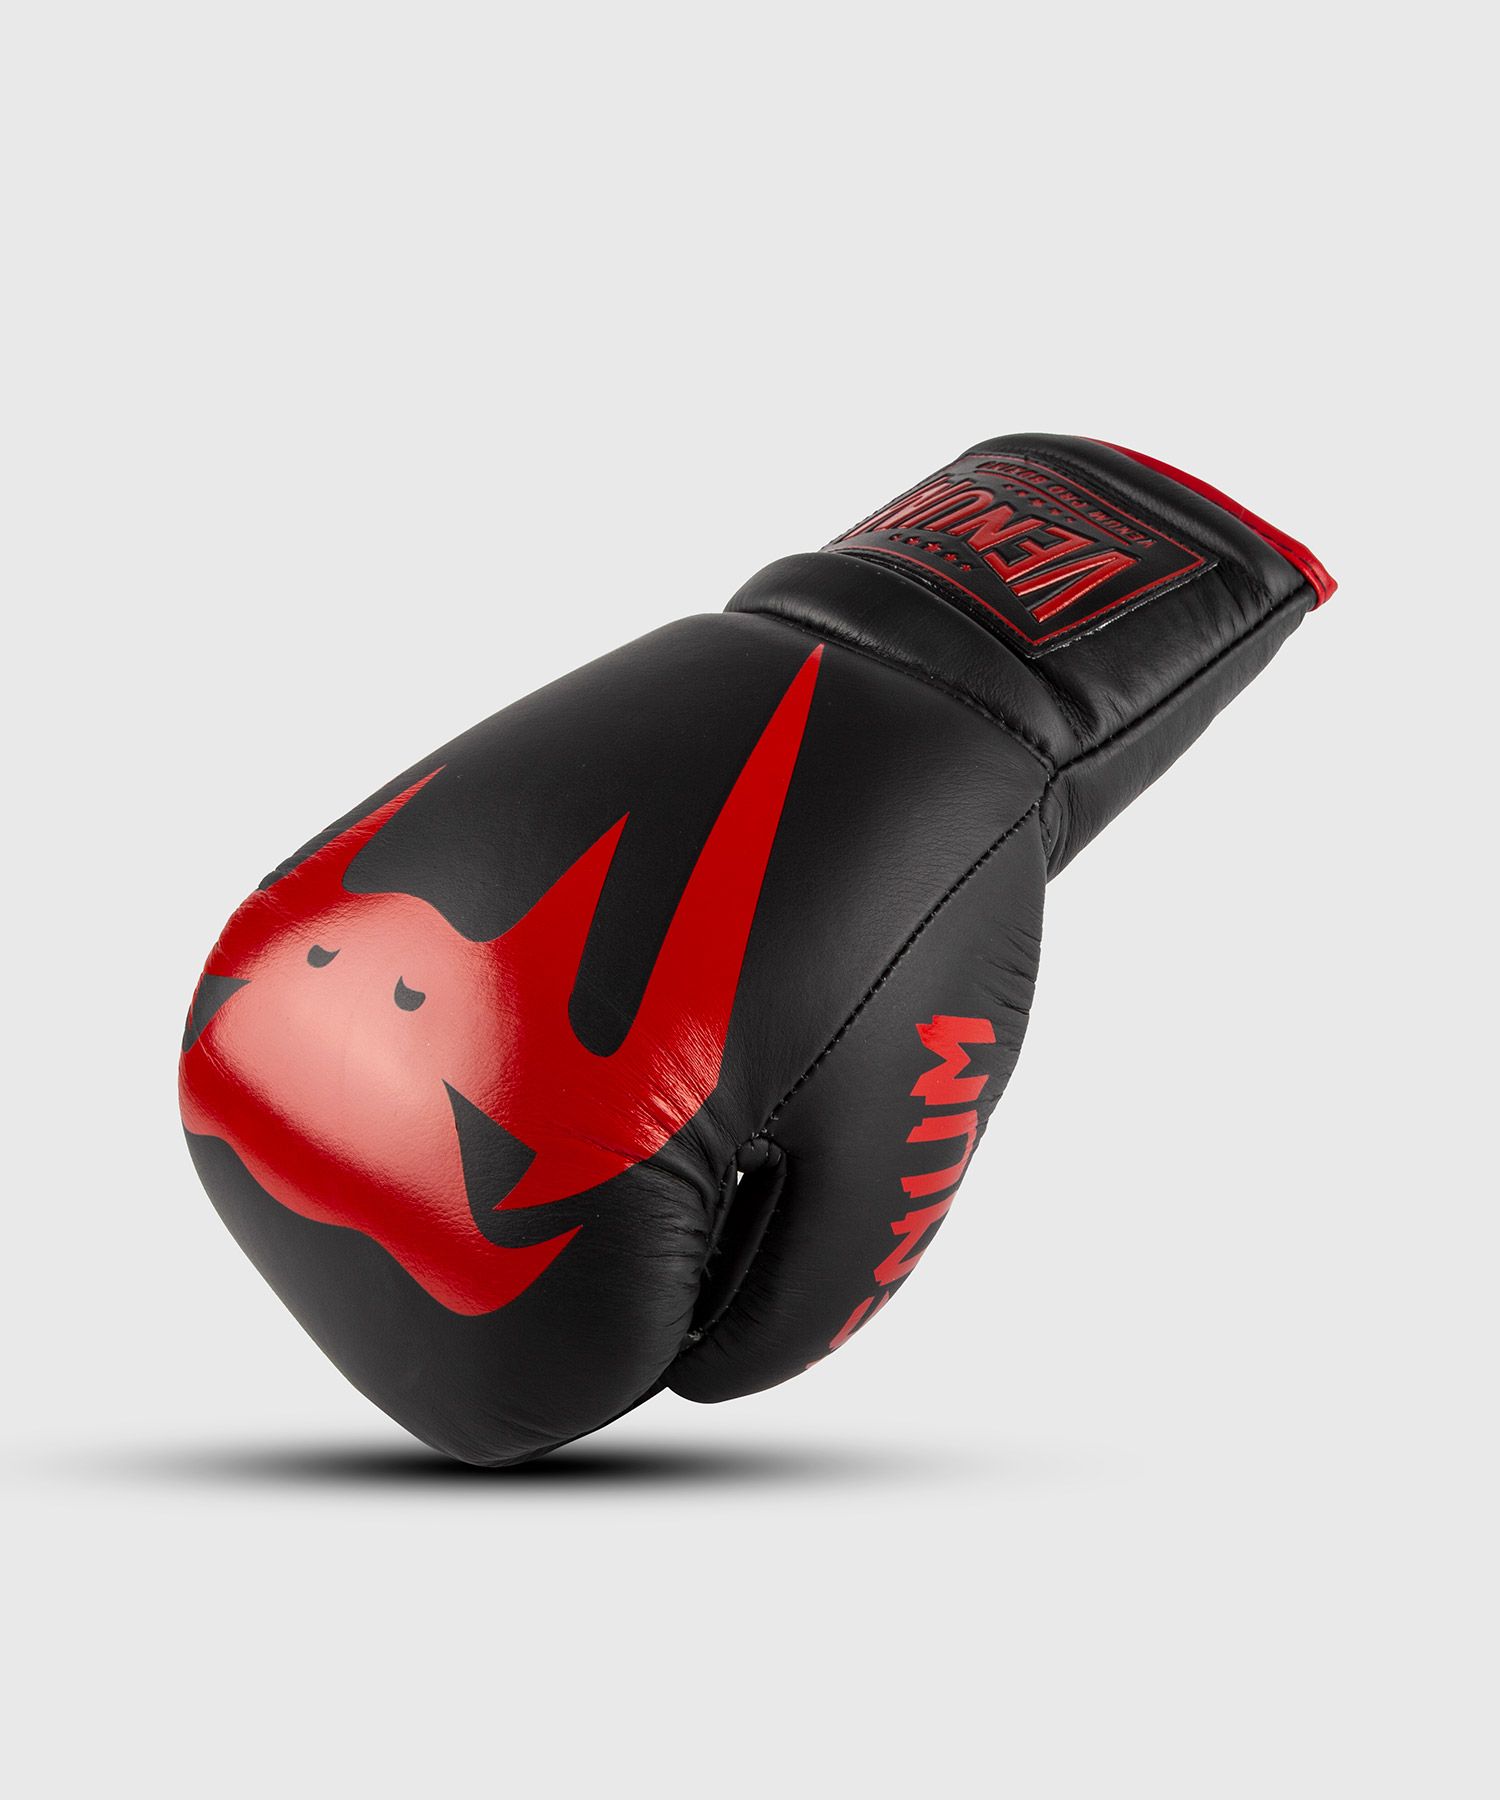 Venum Giant 2.0 Pro Boxing Gloves - With Laces